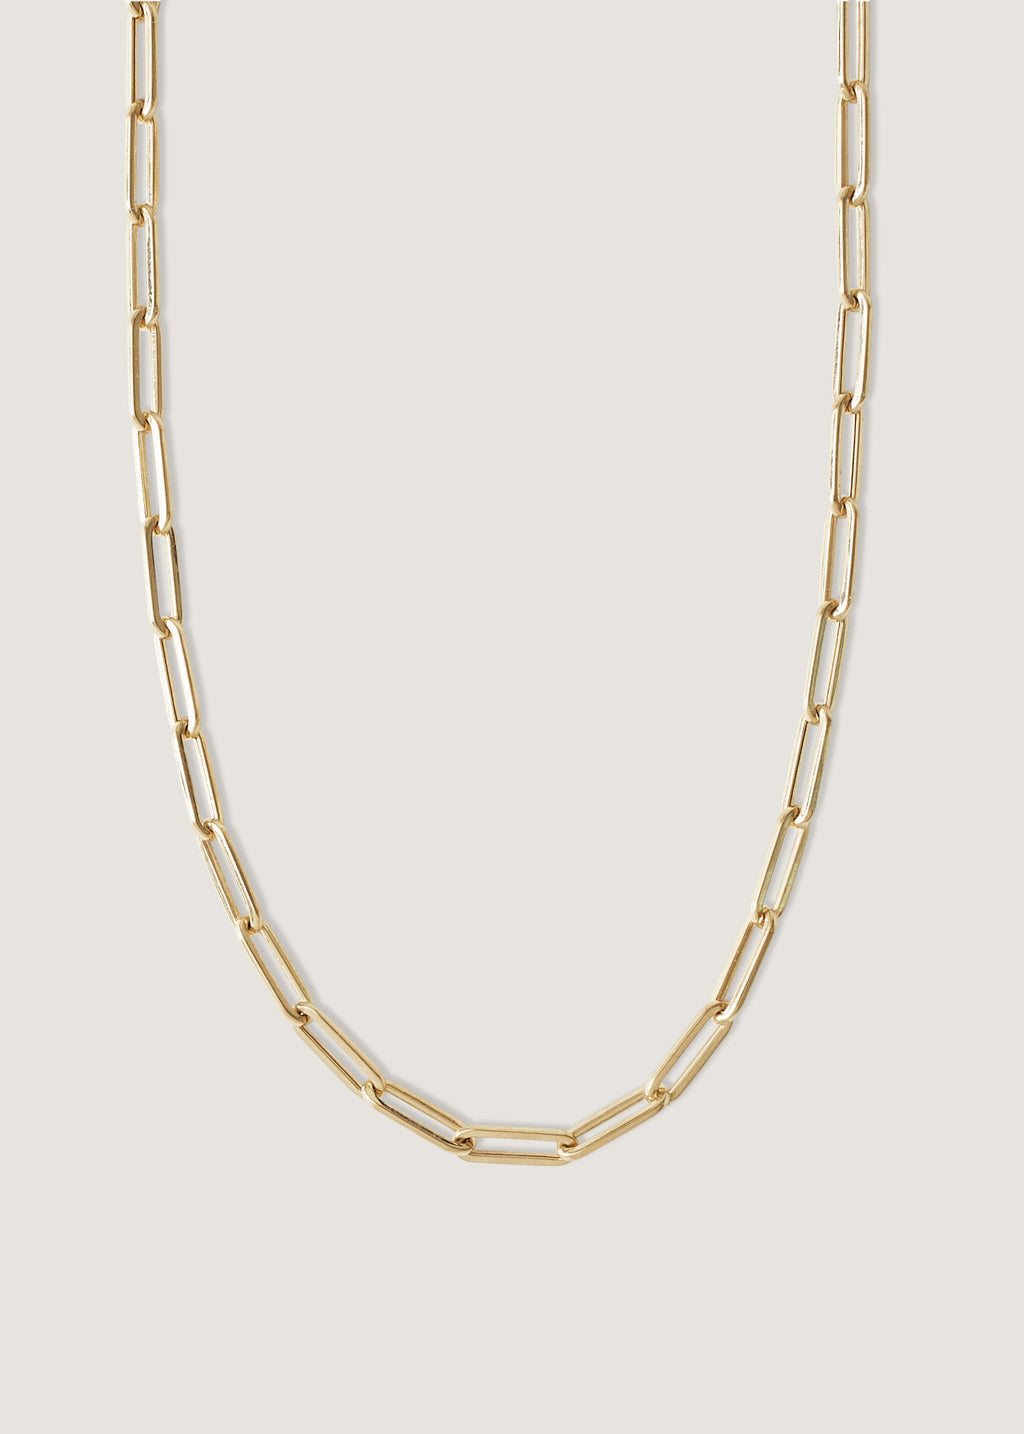 Baroque Pearl Drop Necklace 14K Gold - Kinn Petite Rope Chain / 20